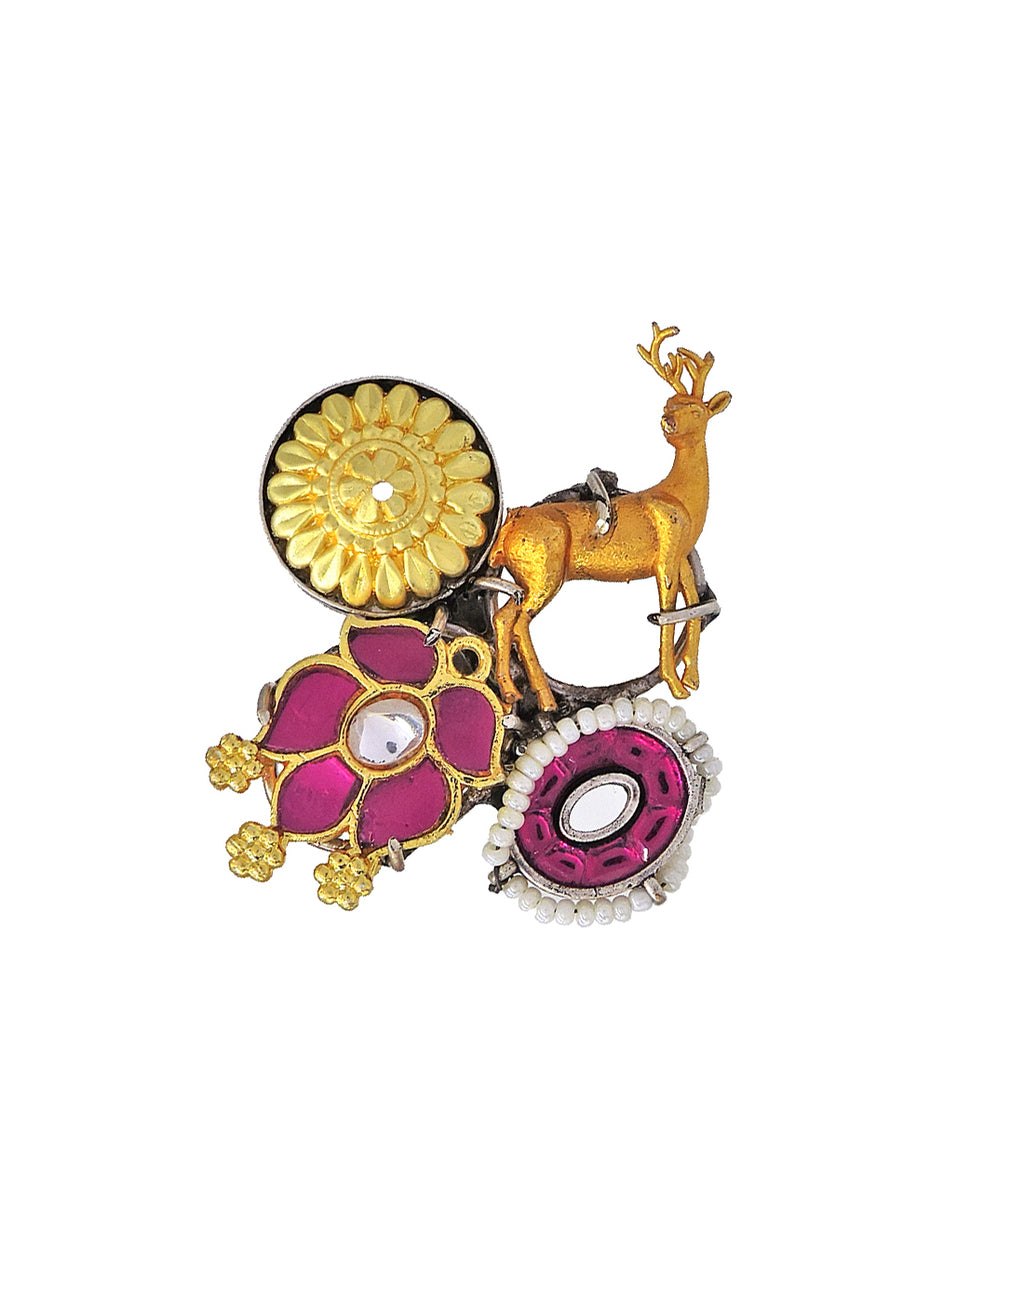 Deer Ornament Ring - Statement Rings - Gold-Plated & Hypoallergenic Jewellery - Made in India - Dubai Jewellery - Dori